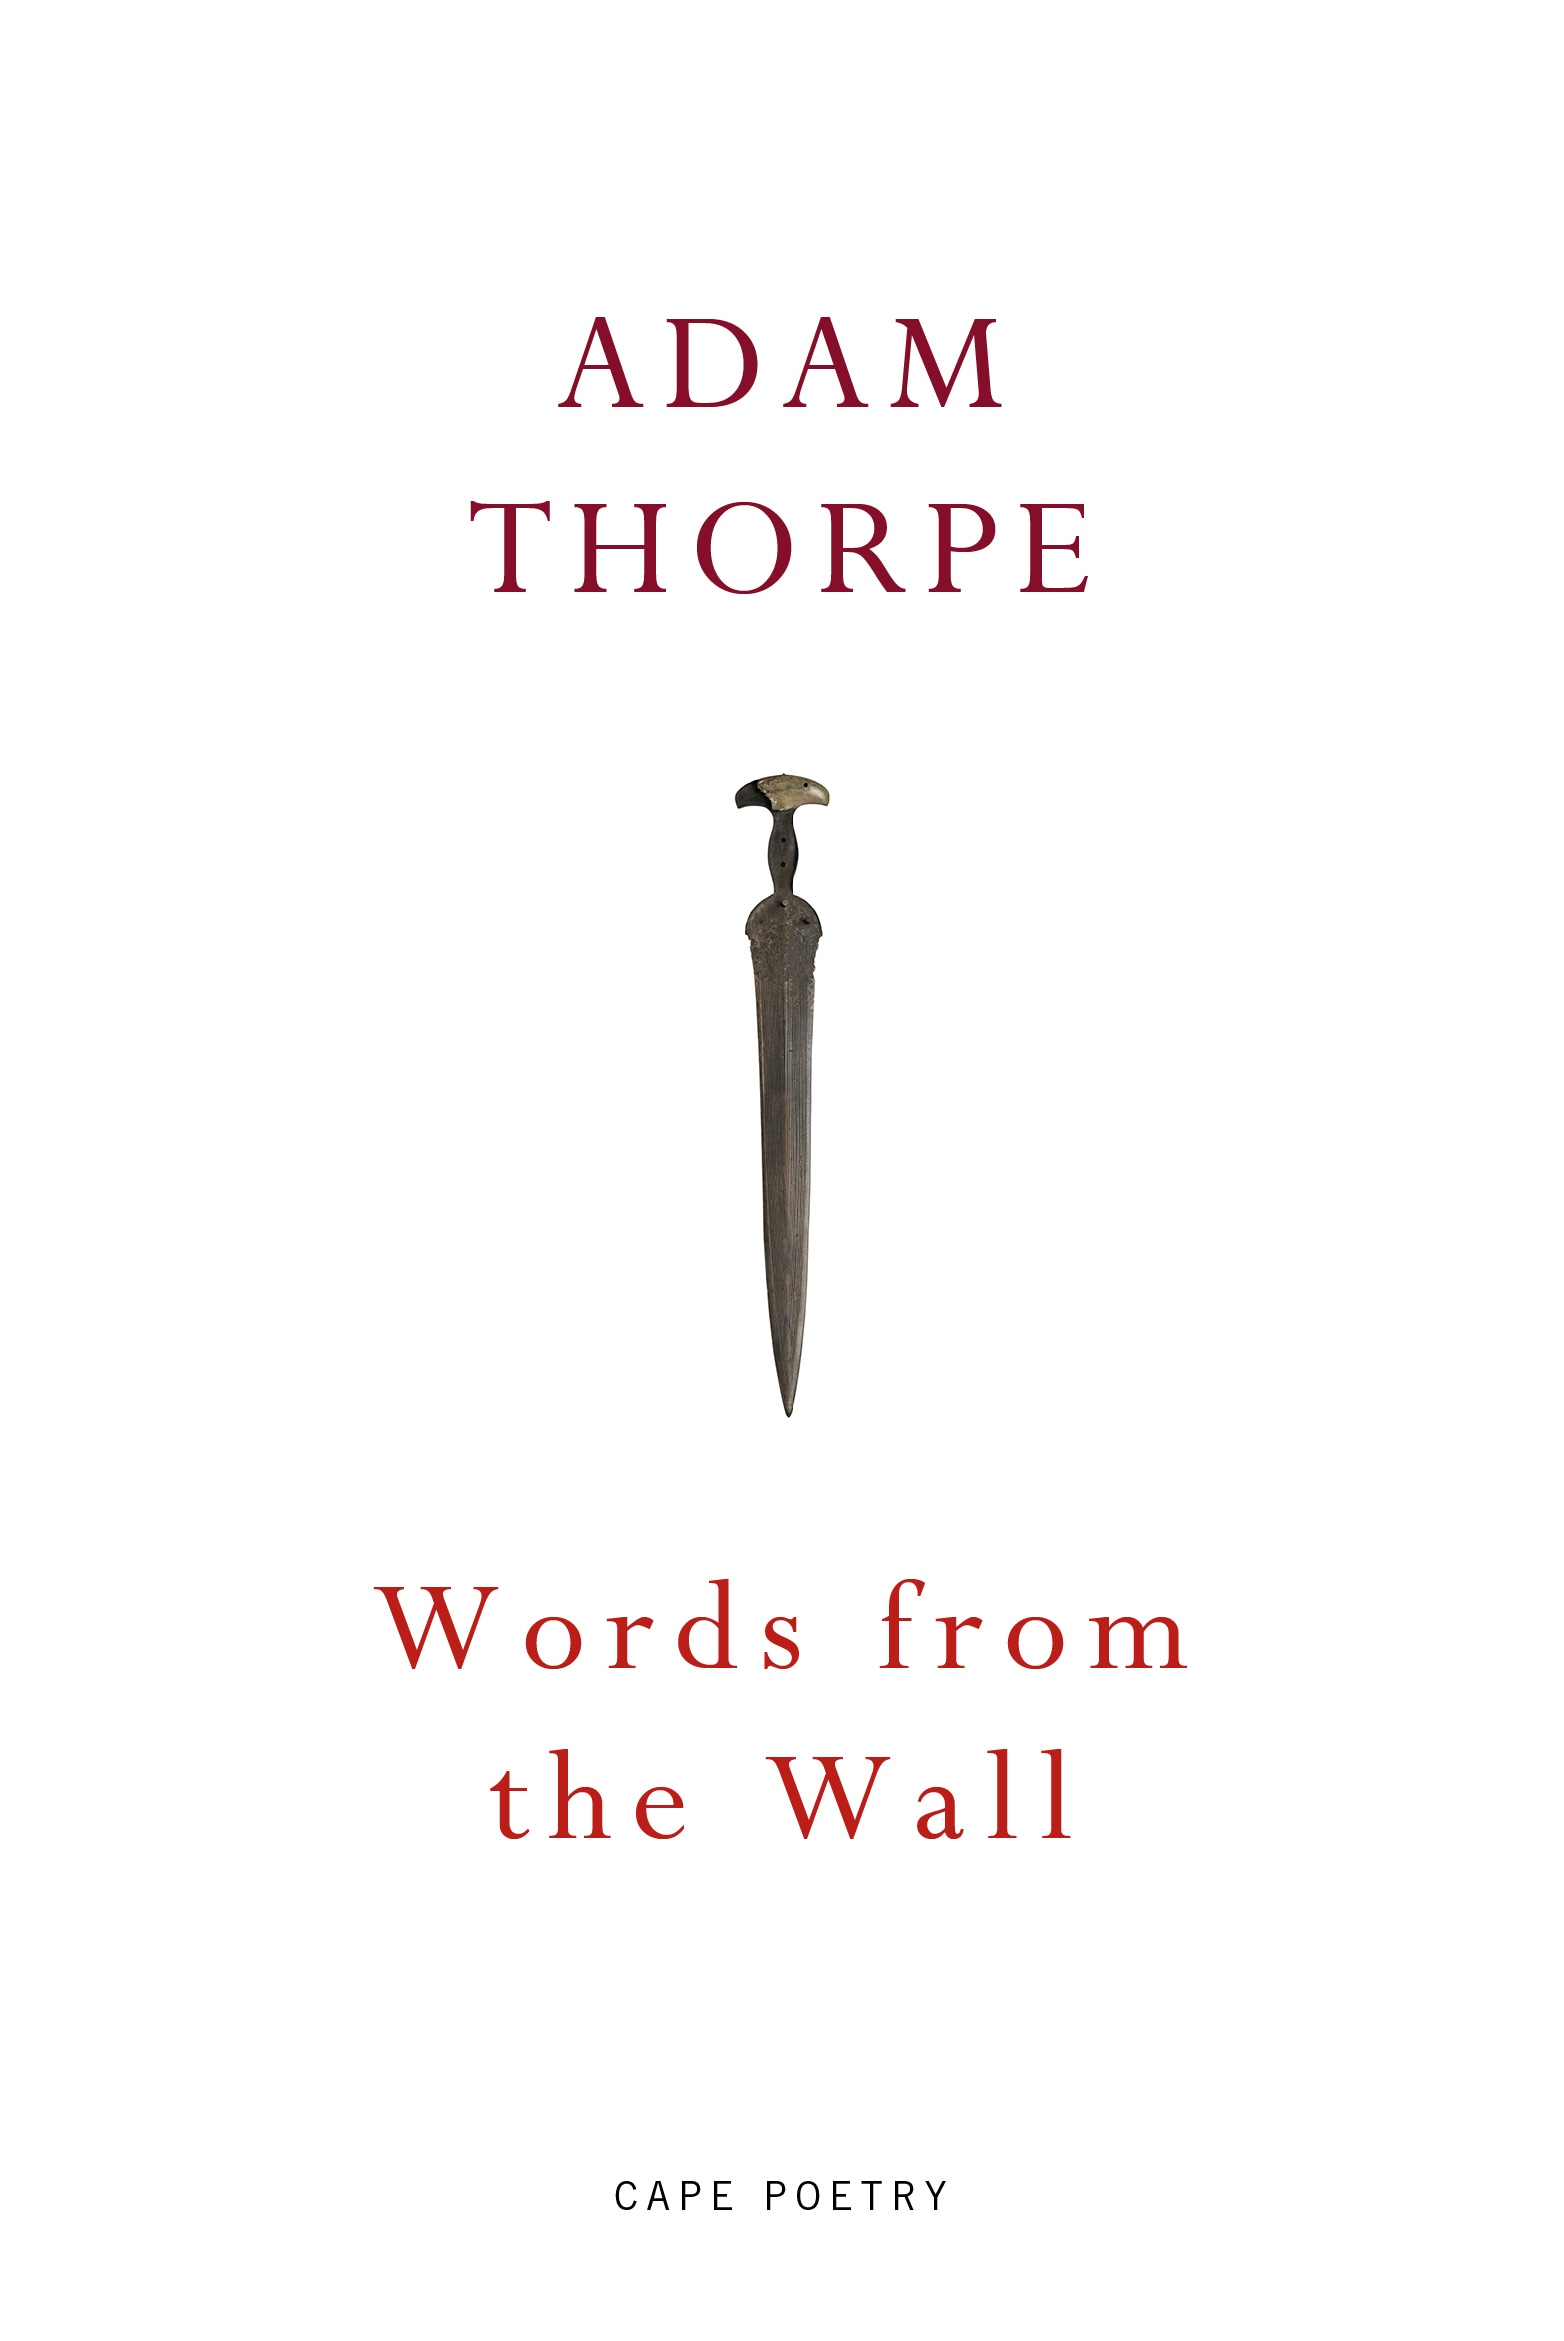 Book “Words From the Wall” by Adam Thorpe — April 11, 2019